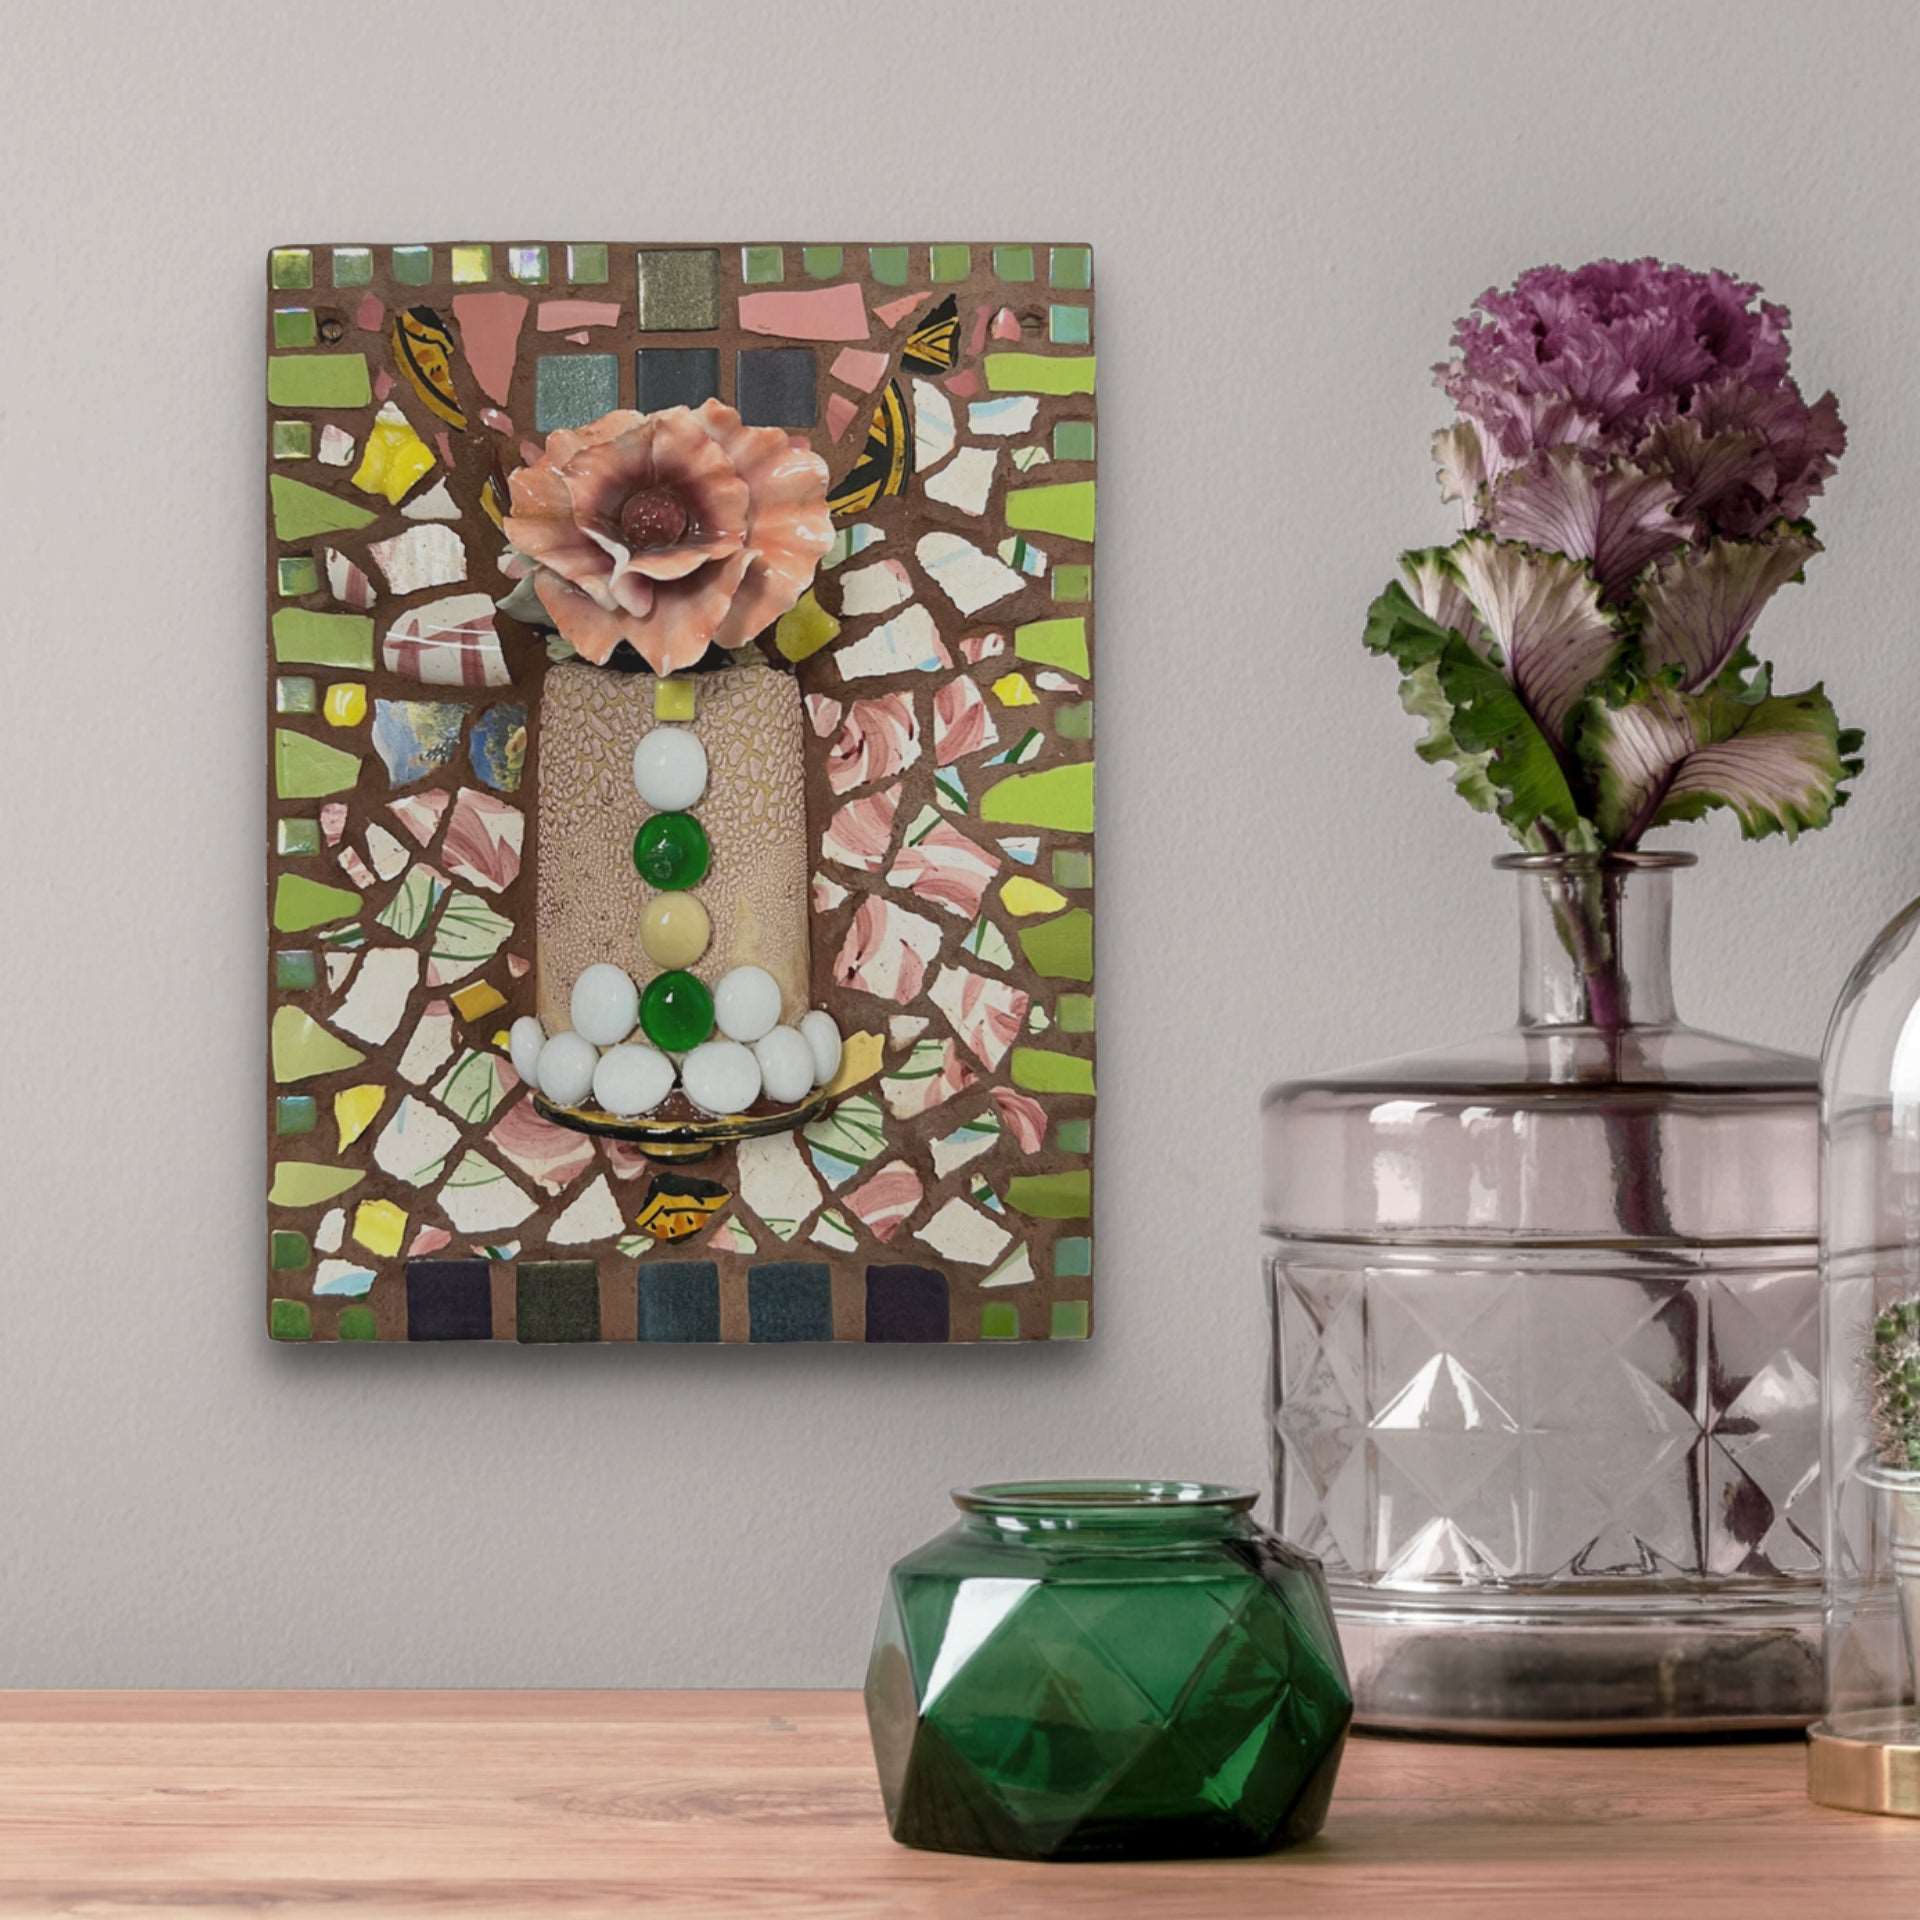 A pink ceramic flower sits atop a vessel that is set in a field of pink and white mosaic pieces with a beautiful green border.